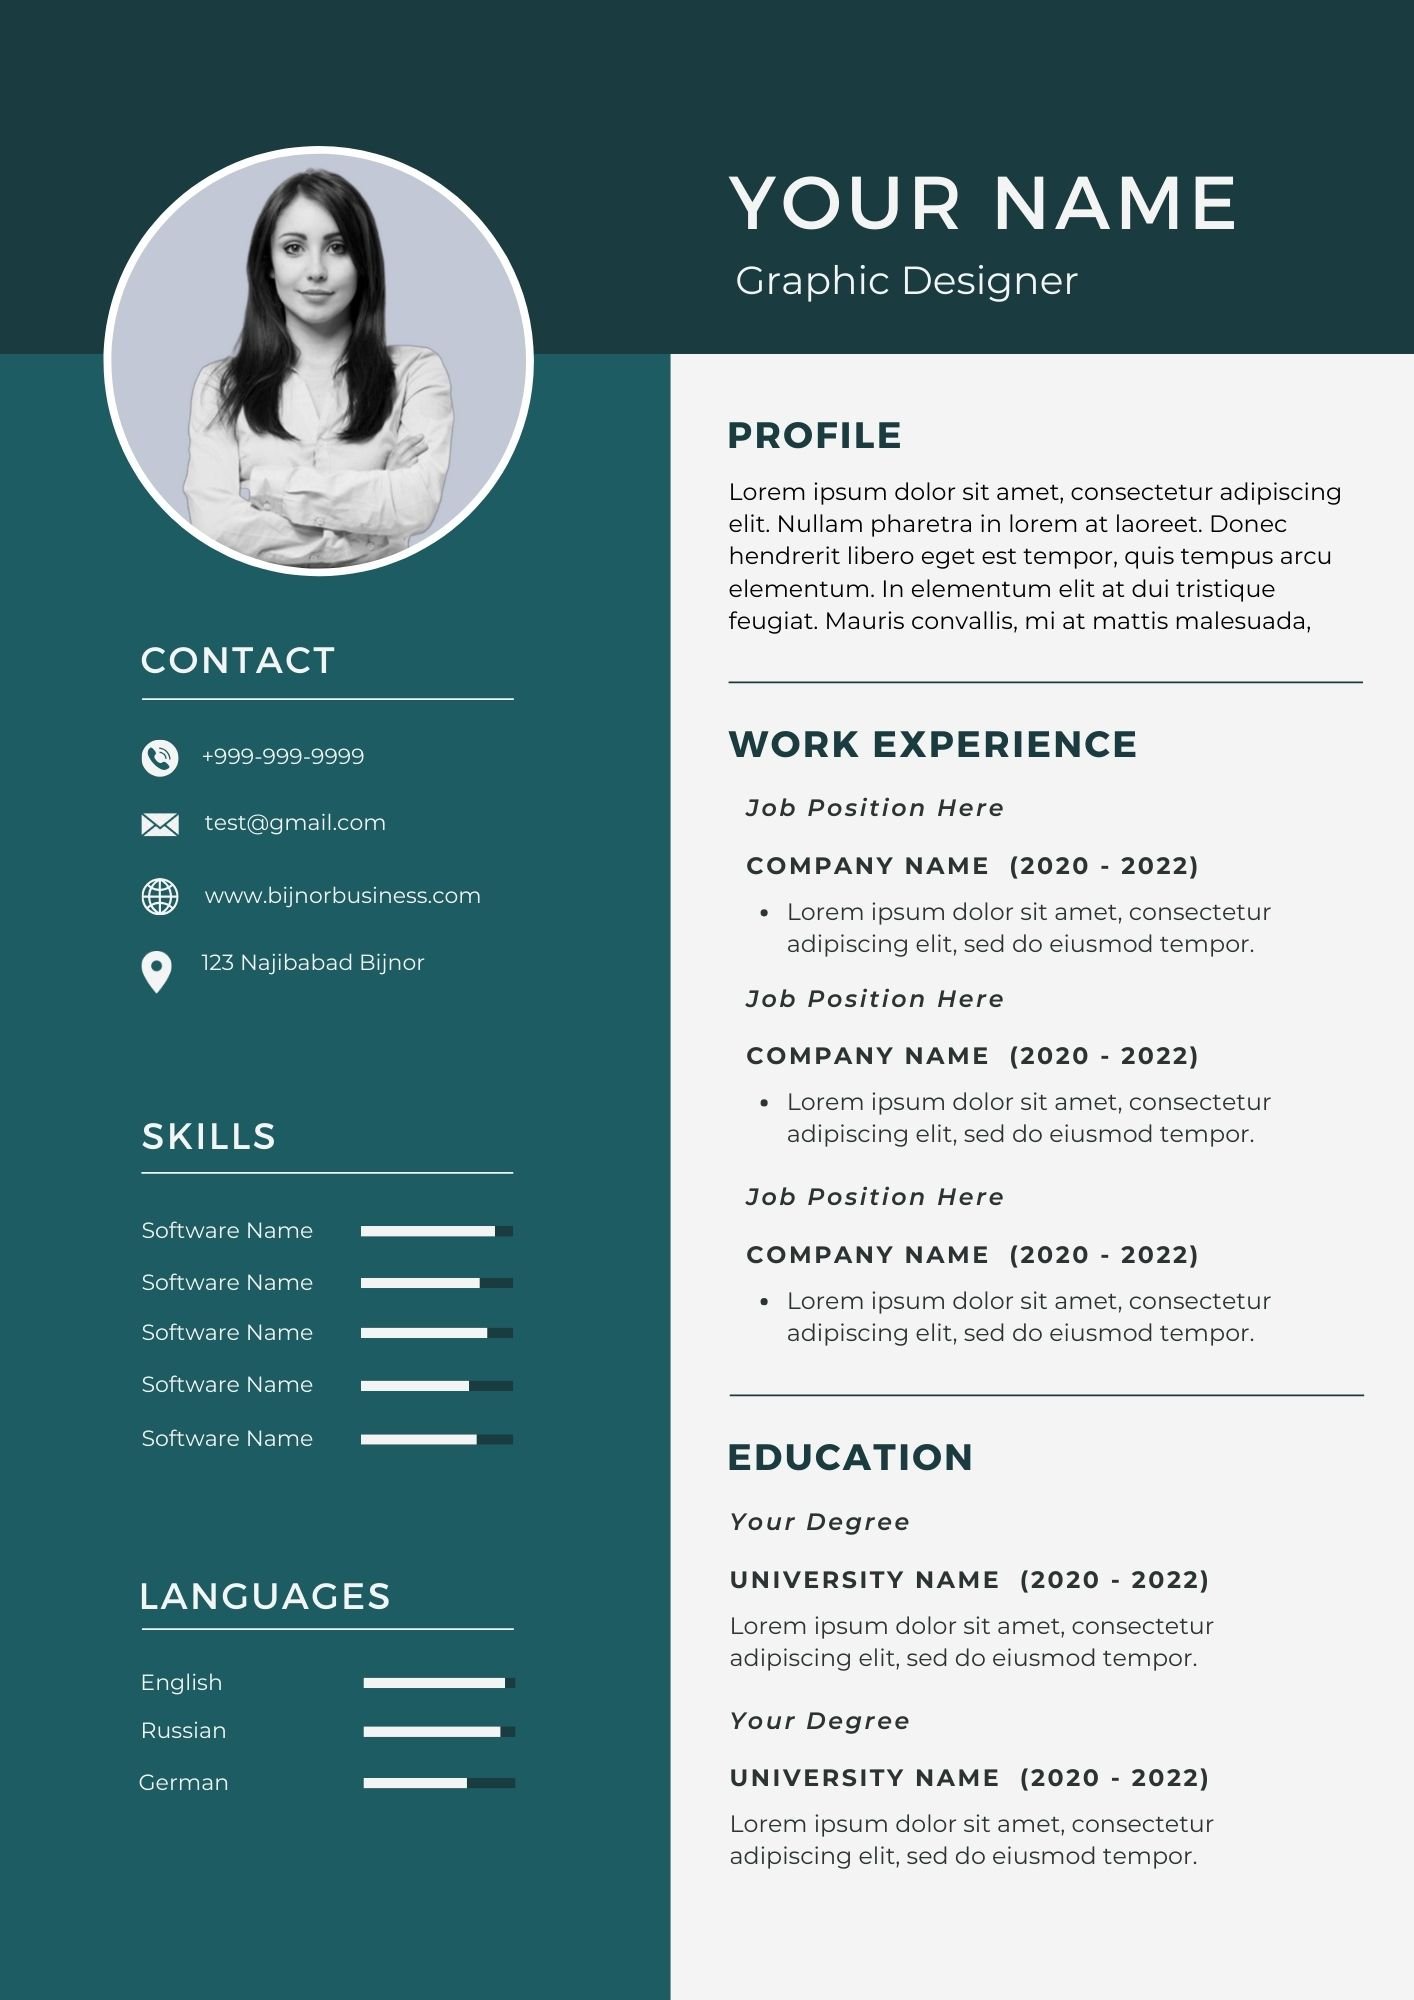 Resume Format For Job Application (Word Docx)